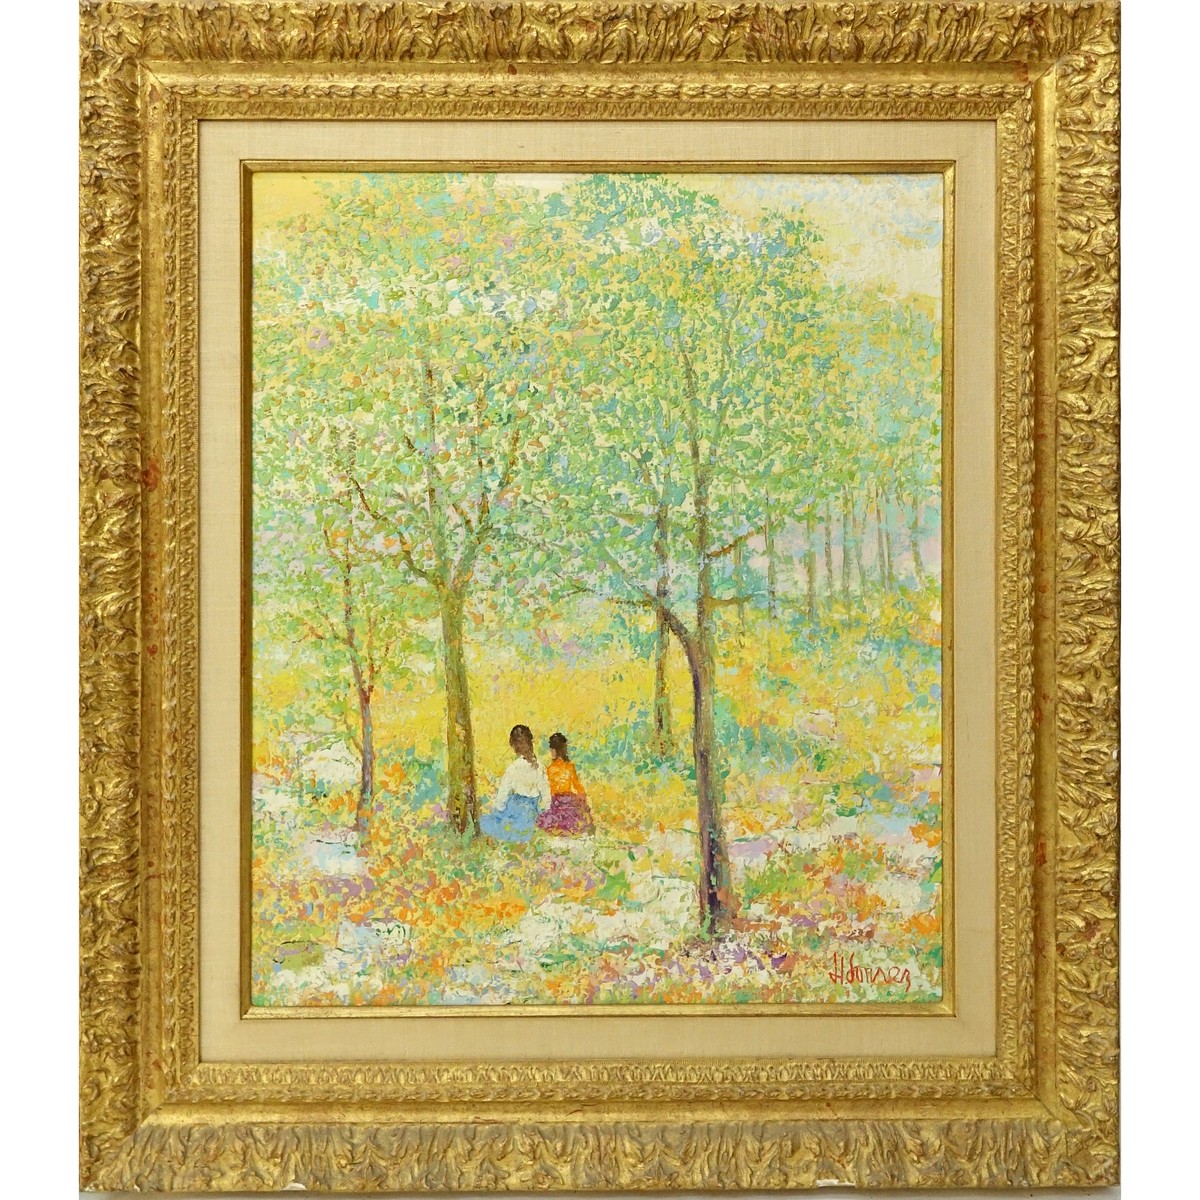 Mid Century Oil On Canvas "Figures In The Woods" Signed lower right H. Suarez??, gallery label en verso: Galerie Felix Vercel, NY.